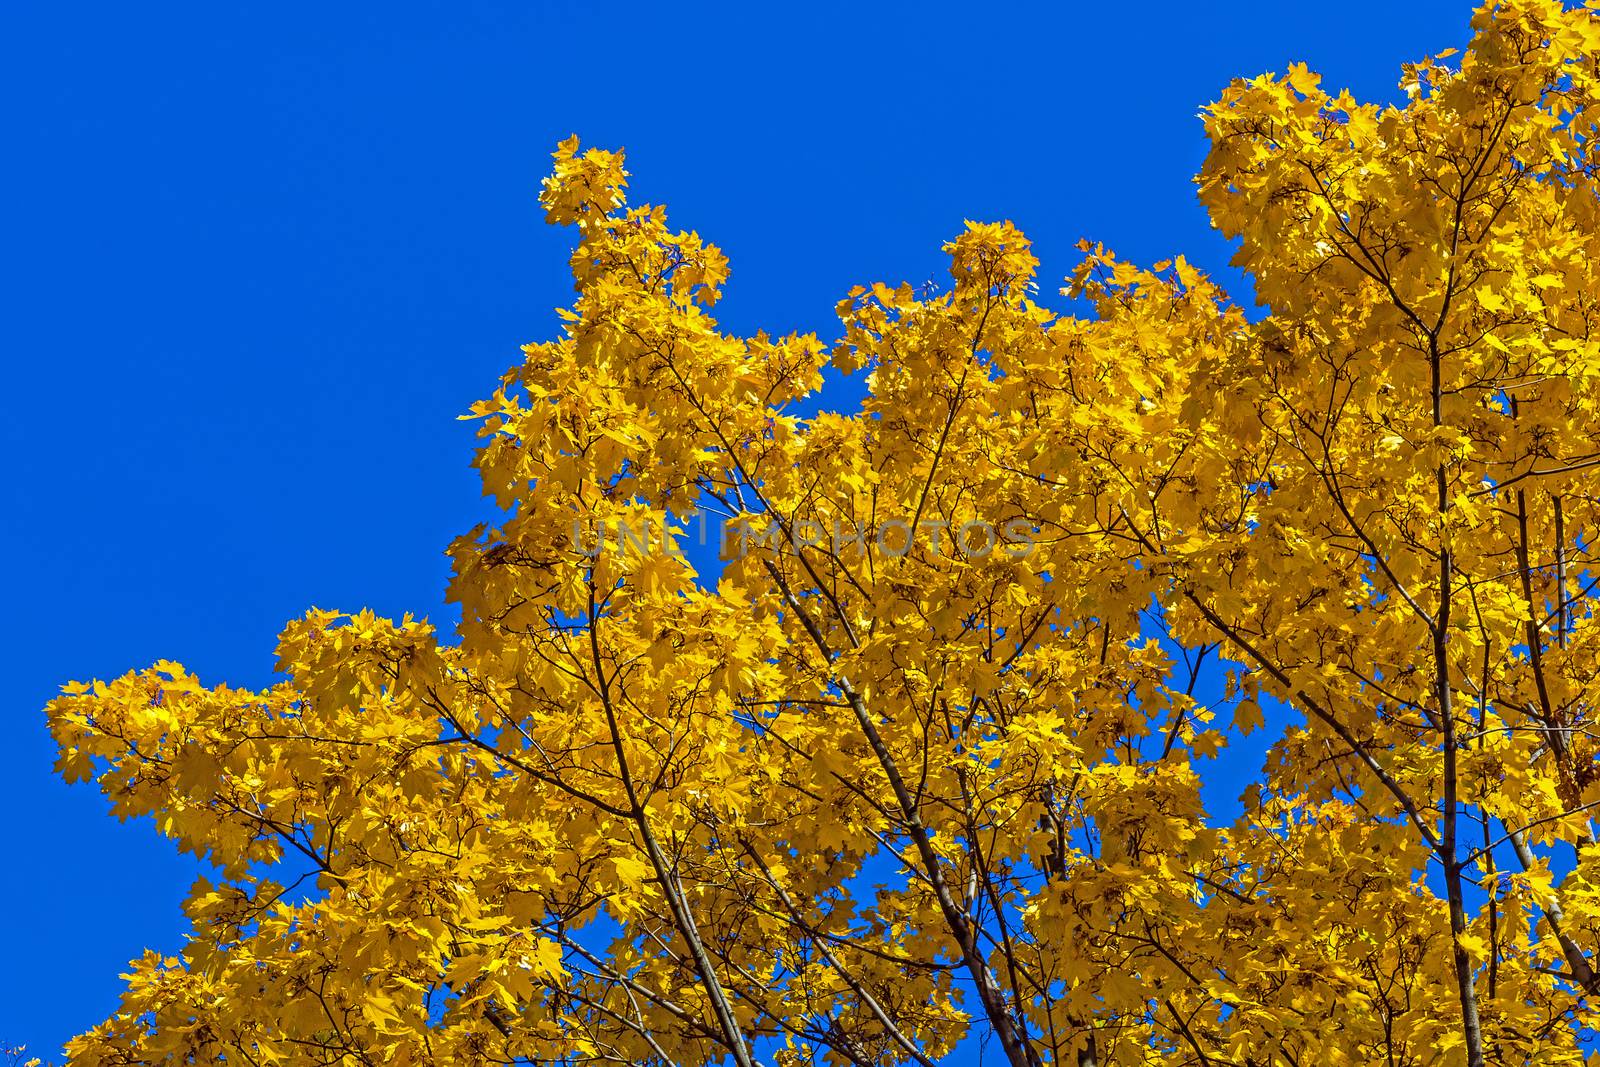 Autumn trees at the blue sky.